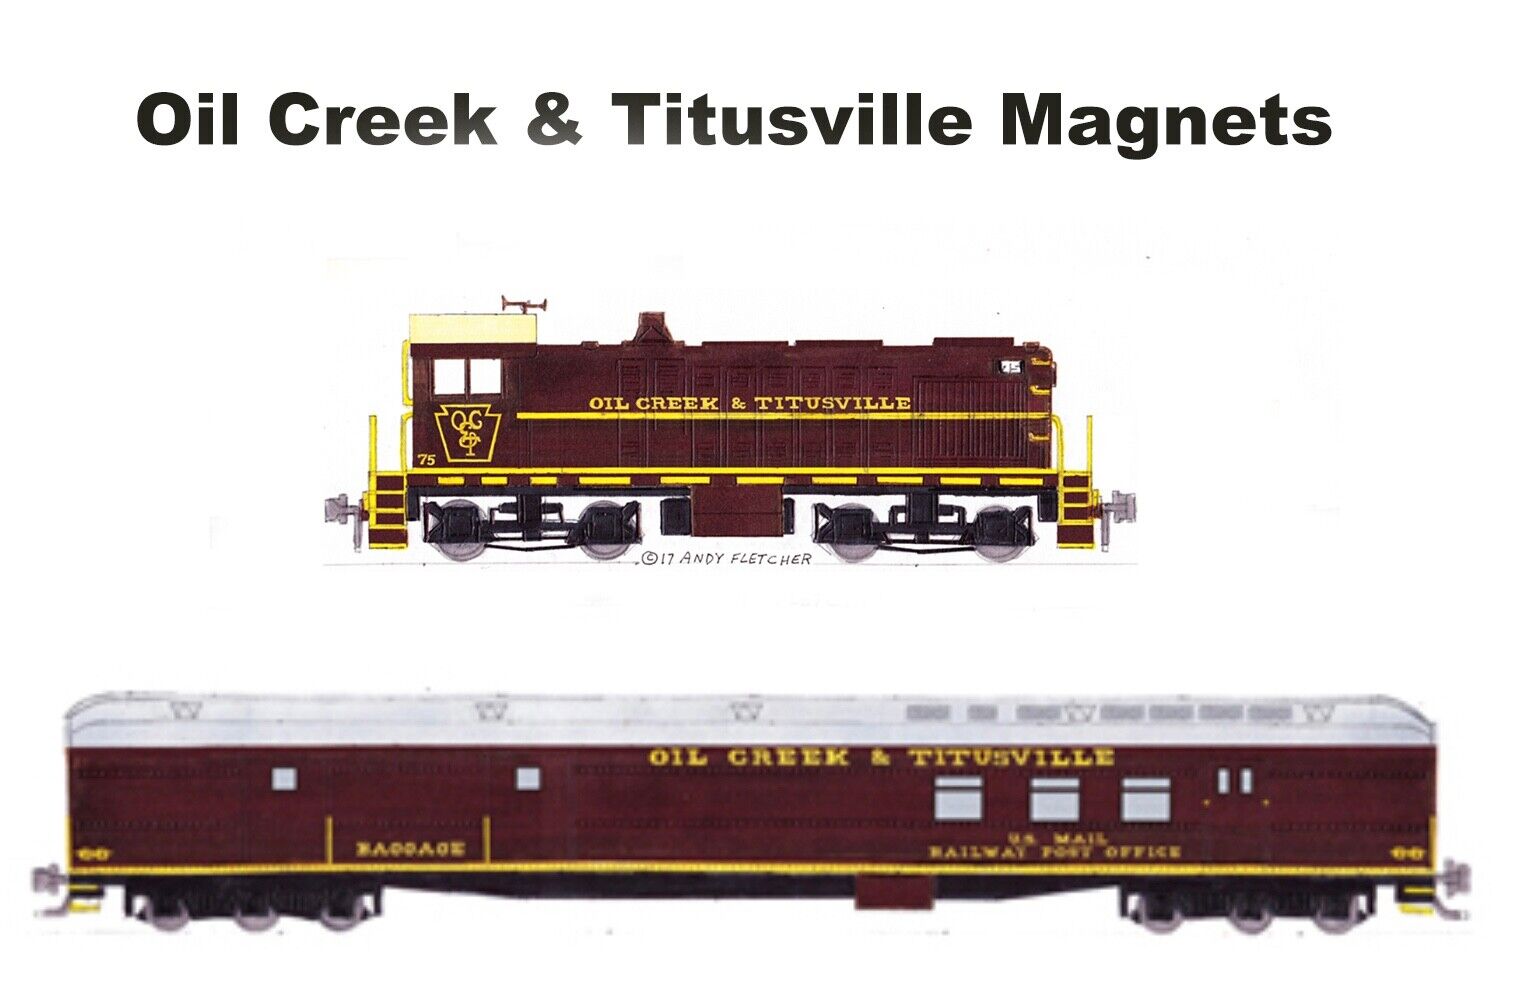 Oil Creek & Titusville S2 #75 & Railway Post Office #60 magnets by Andy Fletcher